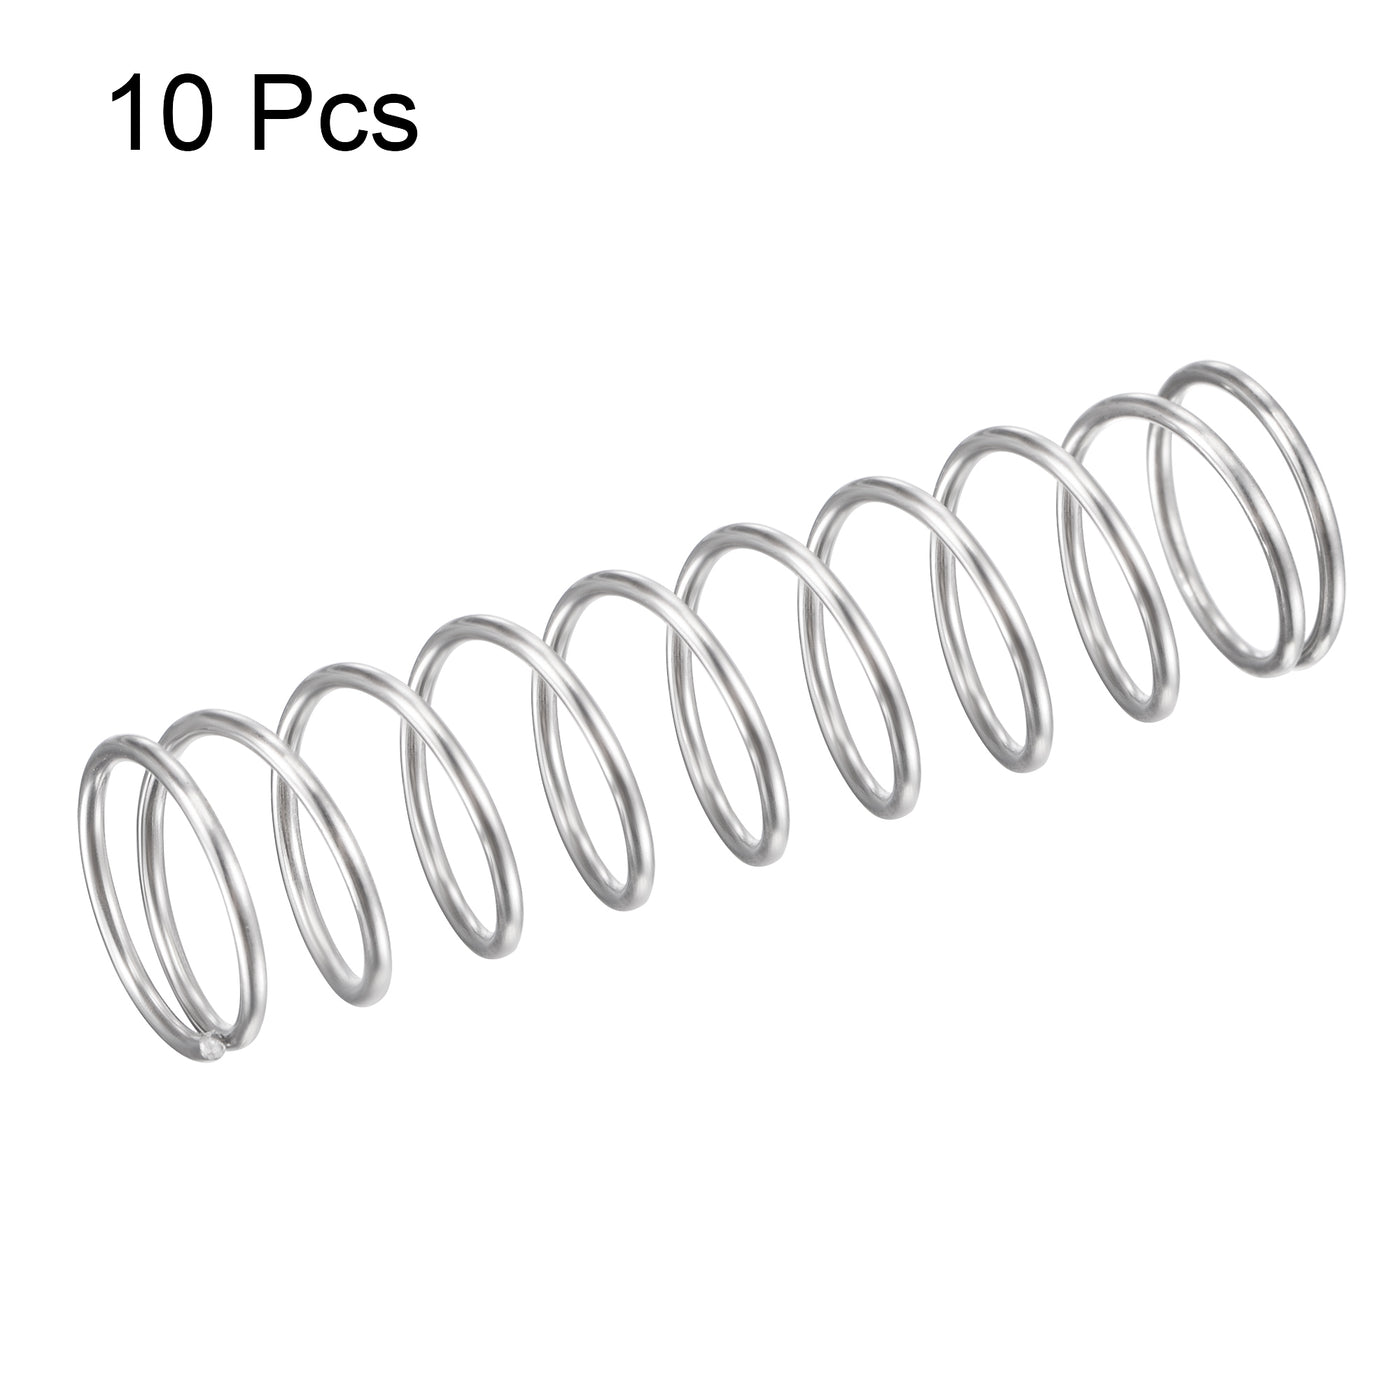 uxcell Uxcell 11mmx0.9mmx40mm 304 Stainless Steel Compression Spring 11N Load Capacity 10pcs